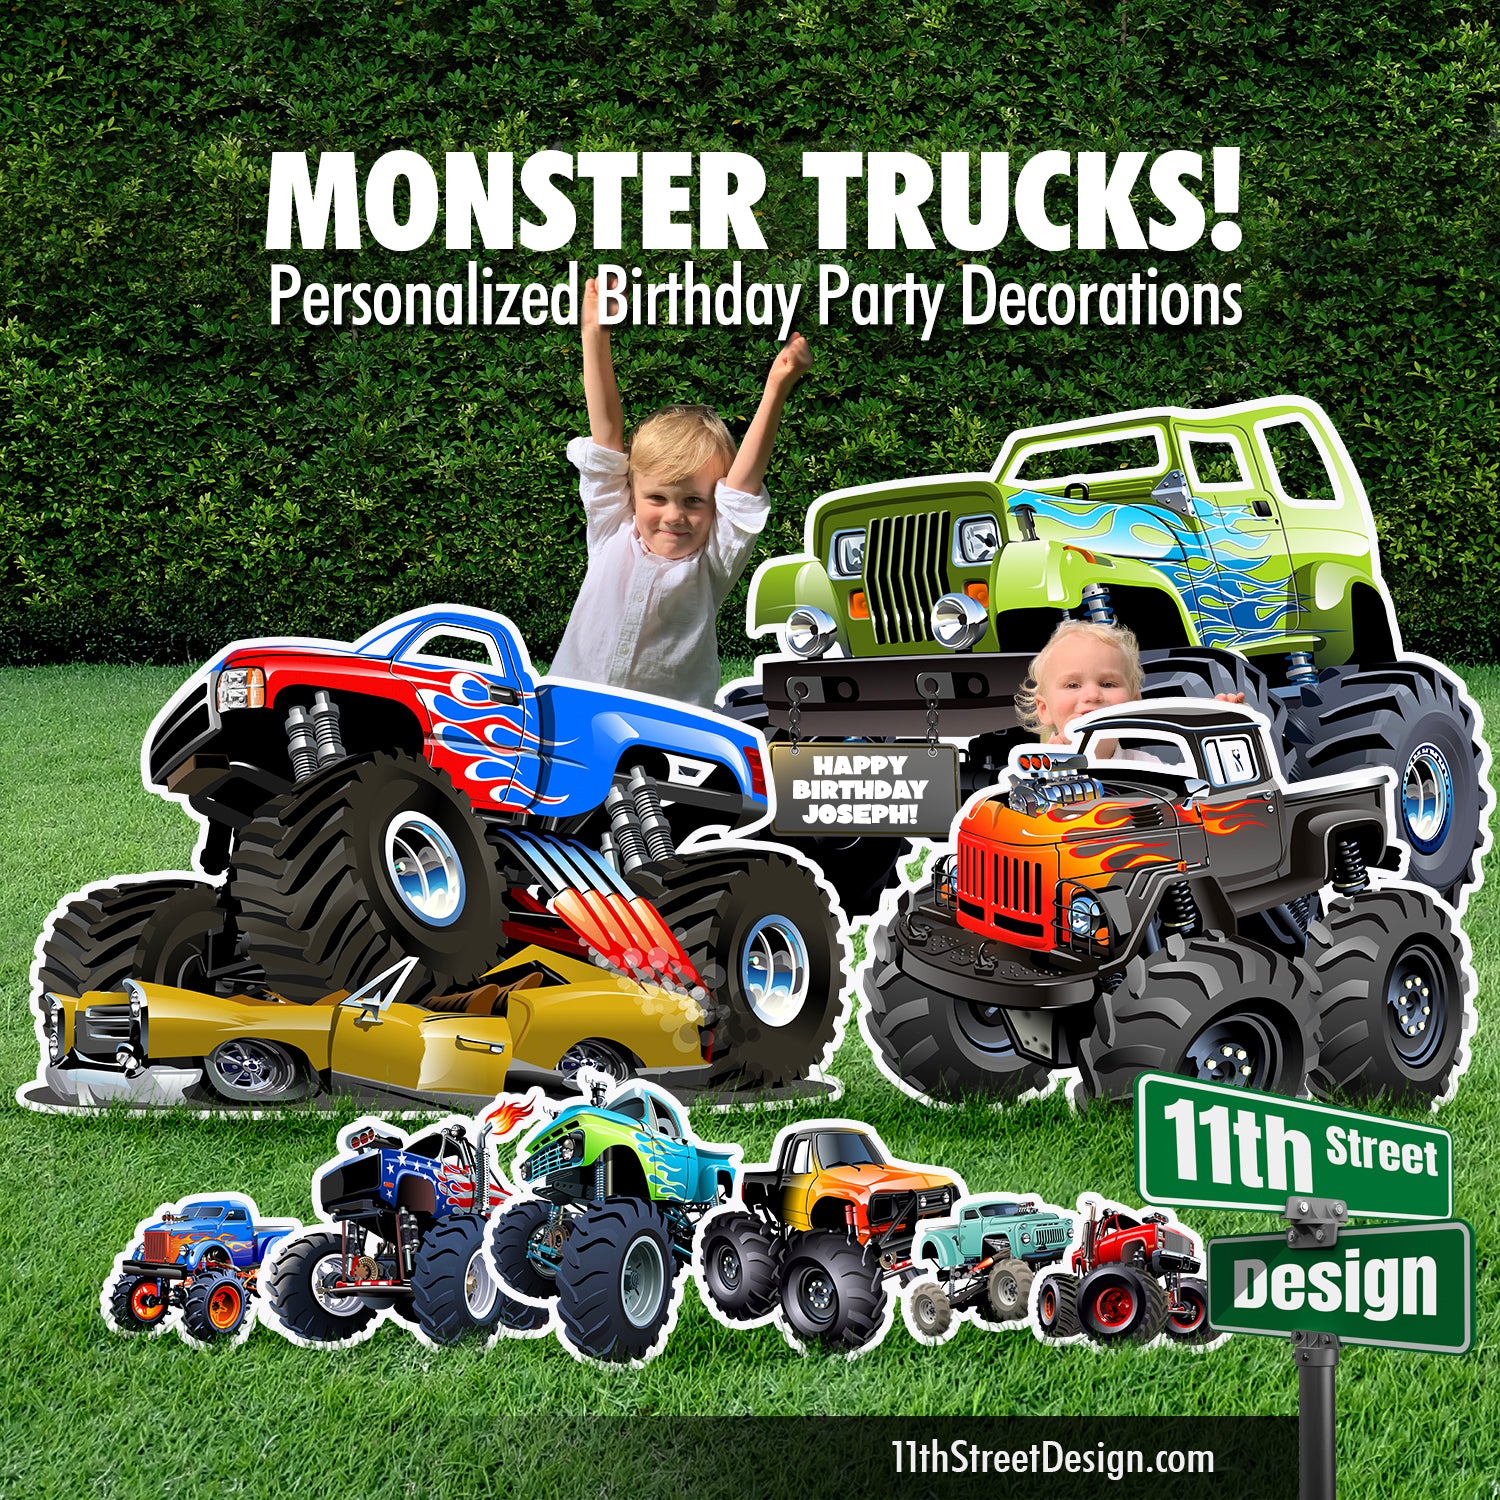 MONSTER TRUCK - Personalized Ornament My Personalized Ornaments